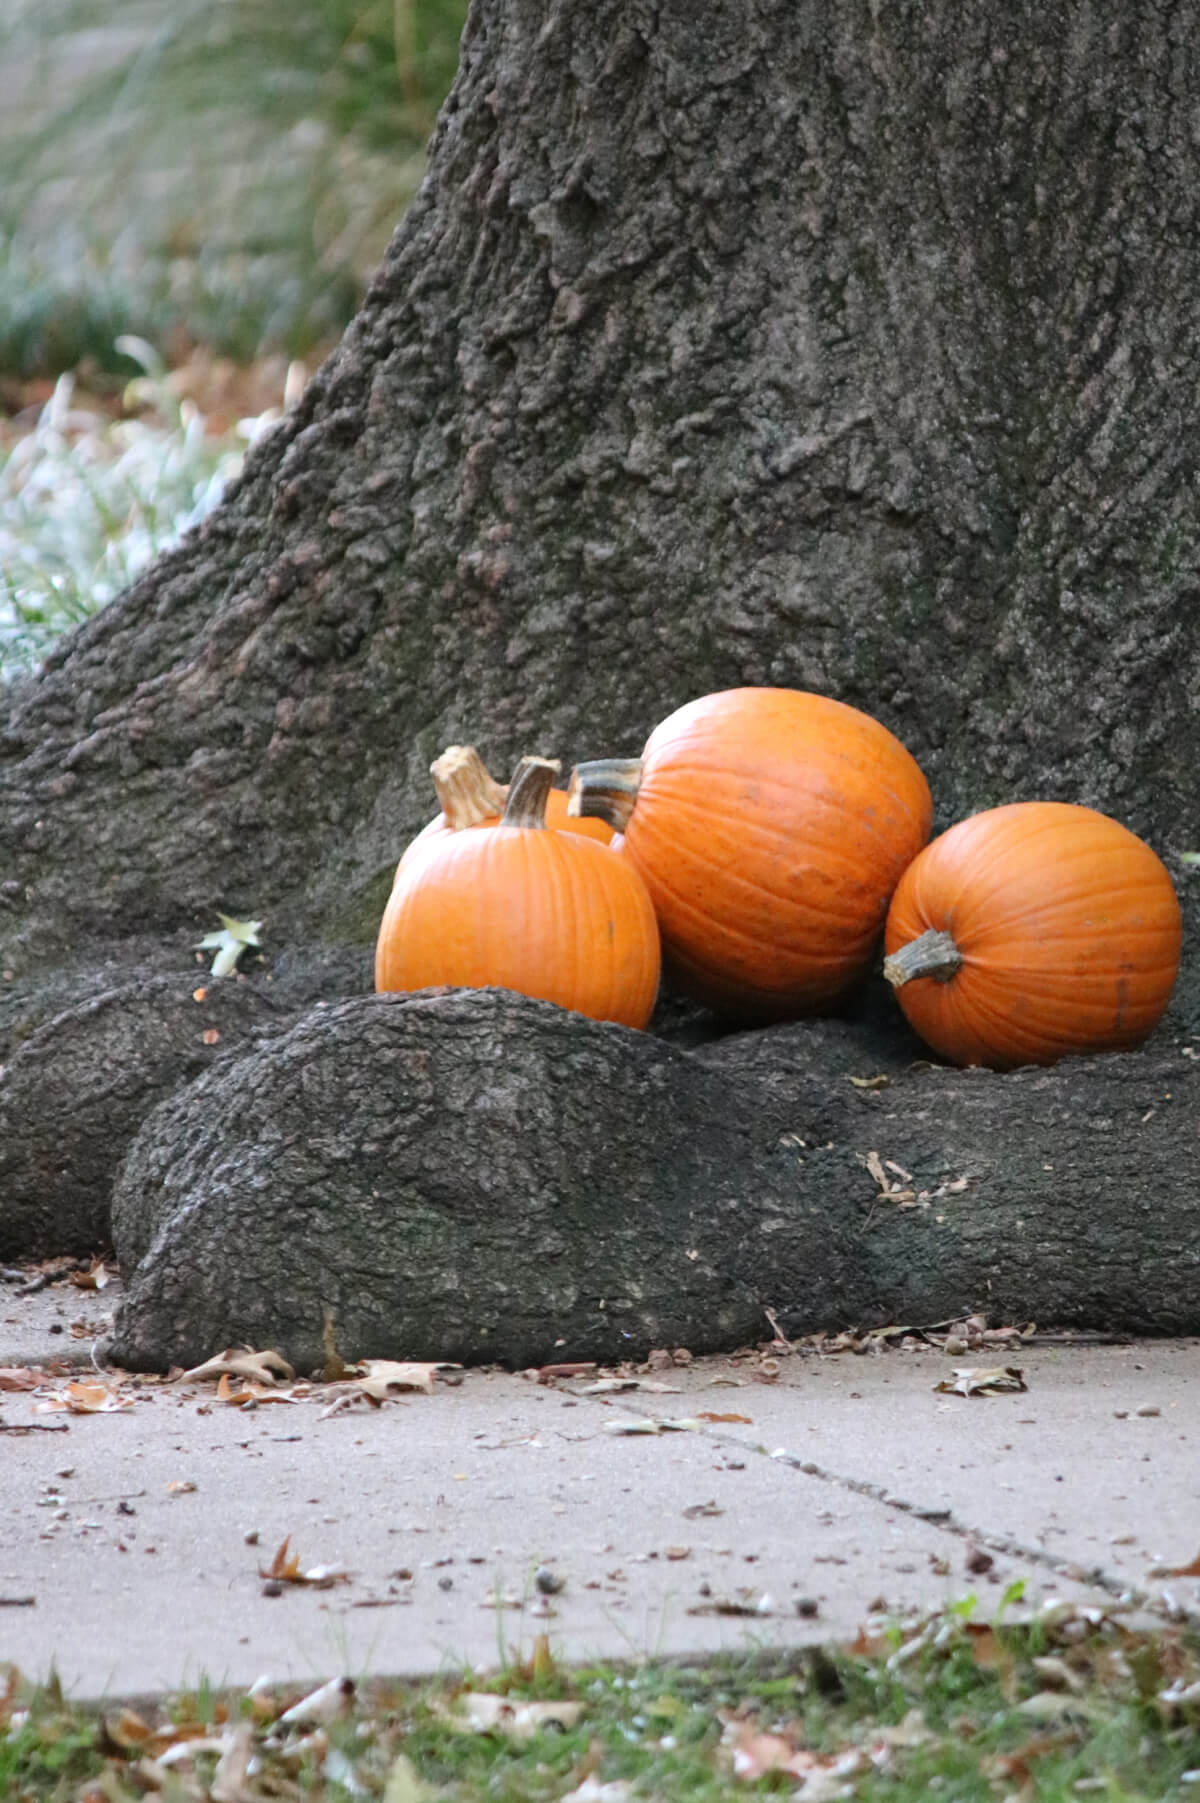 In Sunday Snippets 10.21.23, this is the tree next to my apartment with pumpkins someone put there.